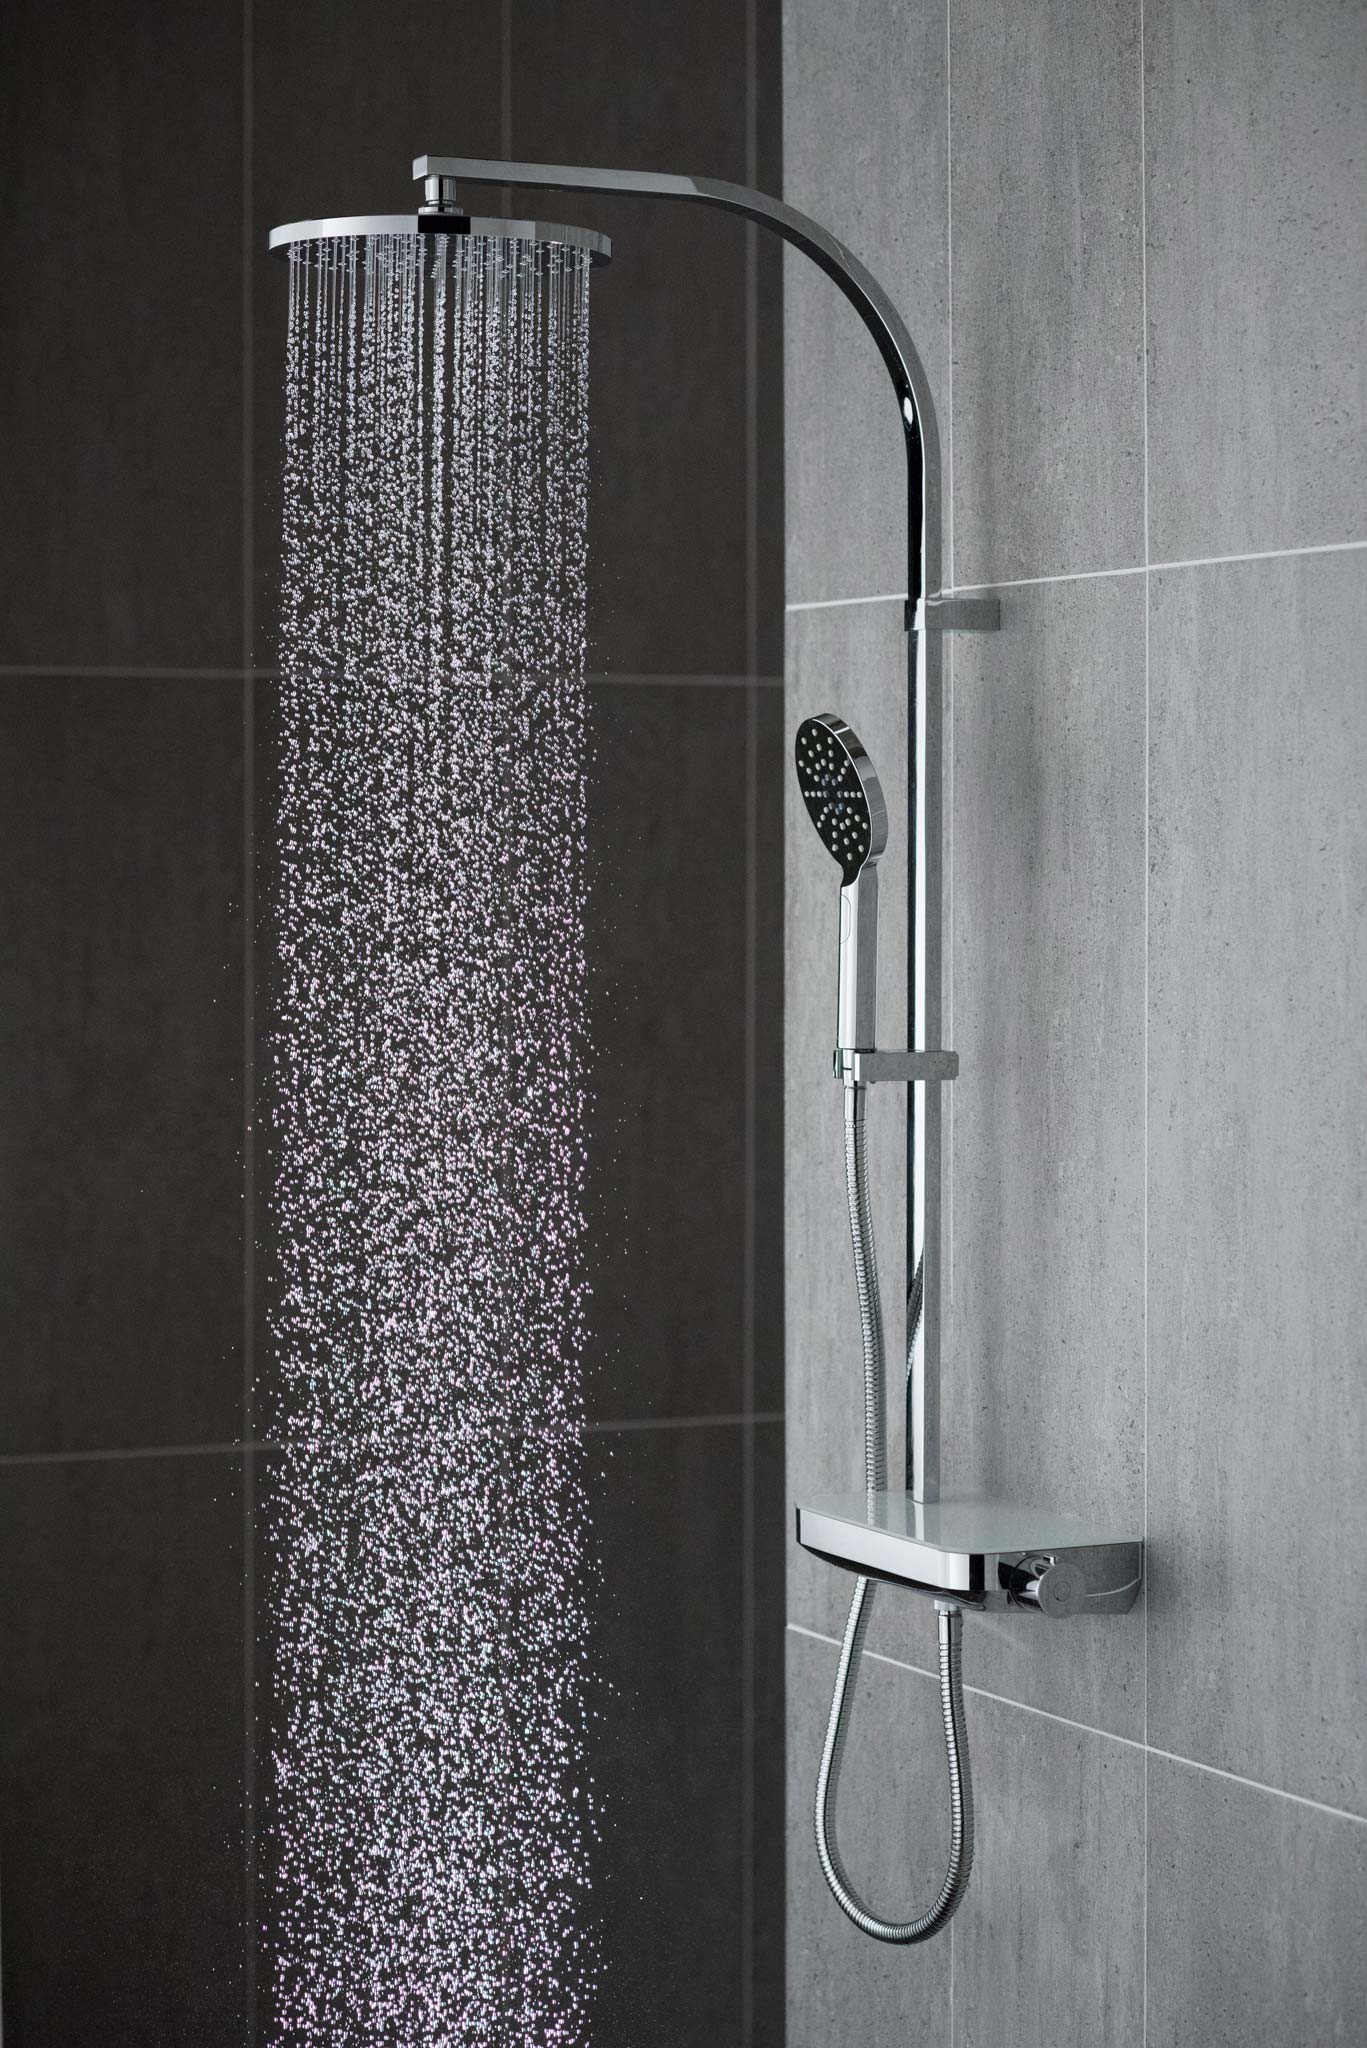 Modern round rigid riser in a grey tiled room with water cascading out of the shower head, shutter speed 1/2500th second to freeze the water.